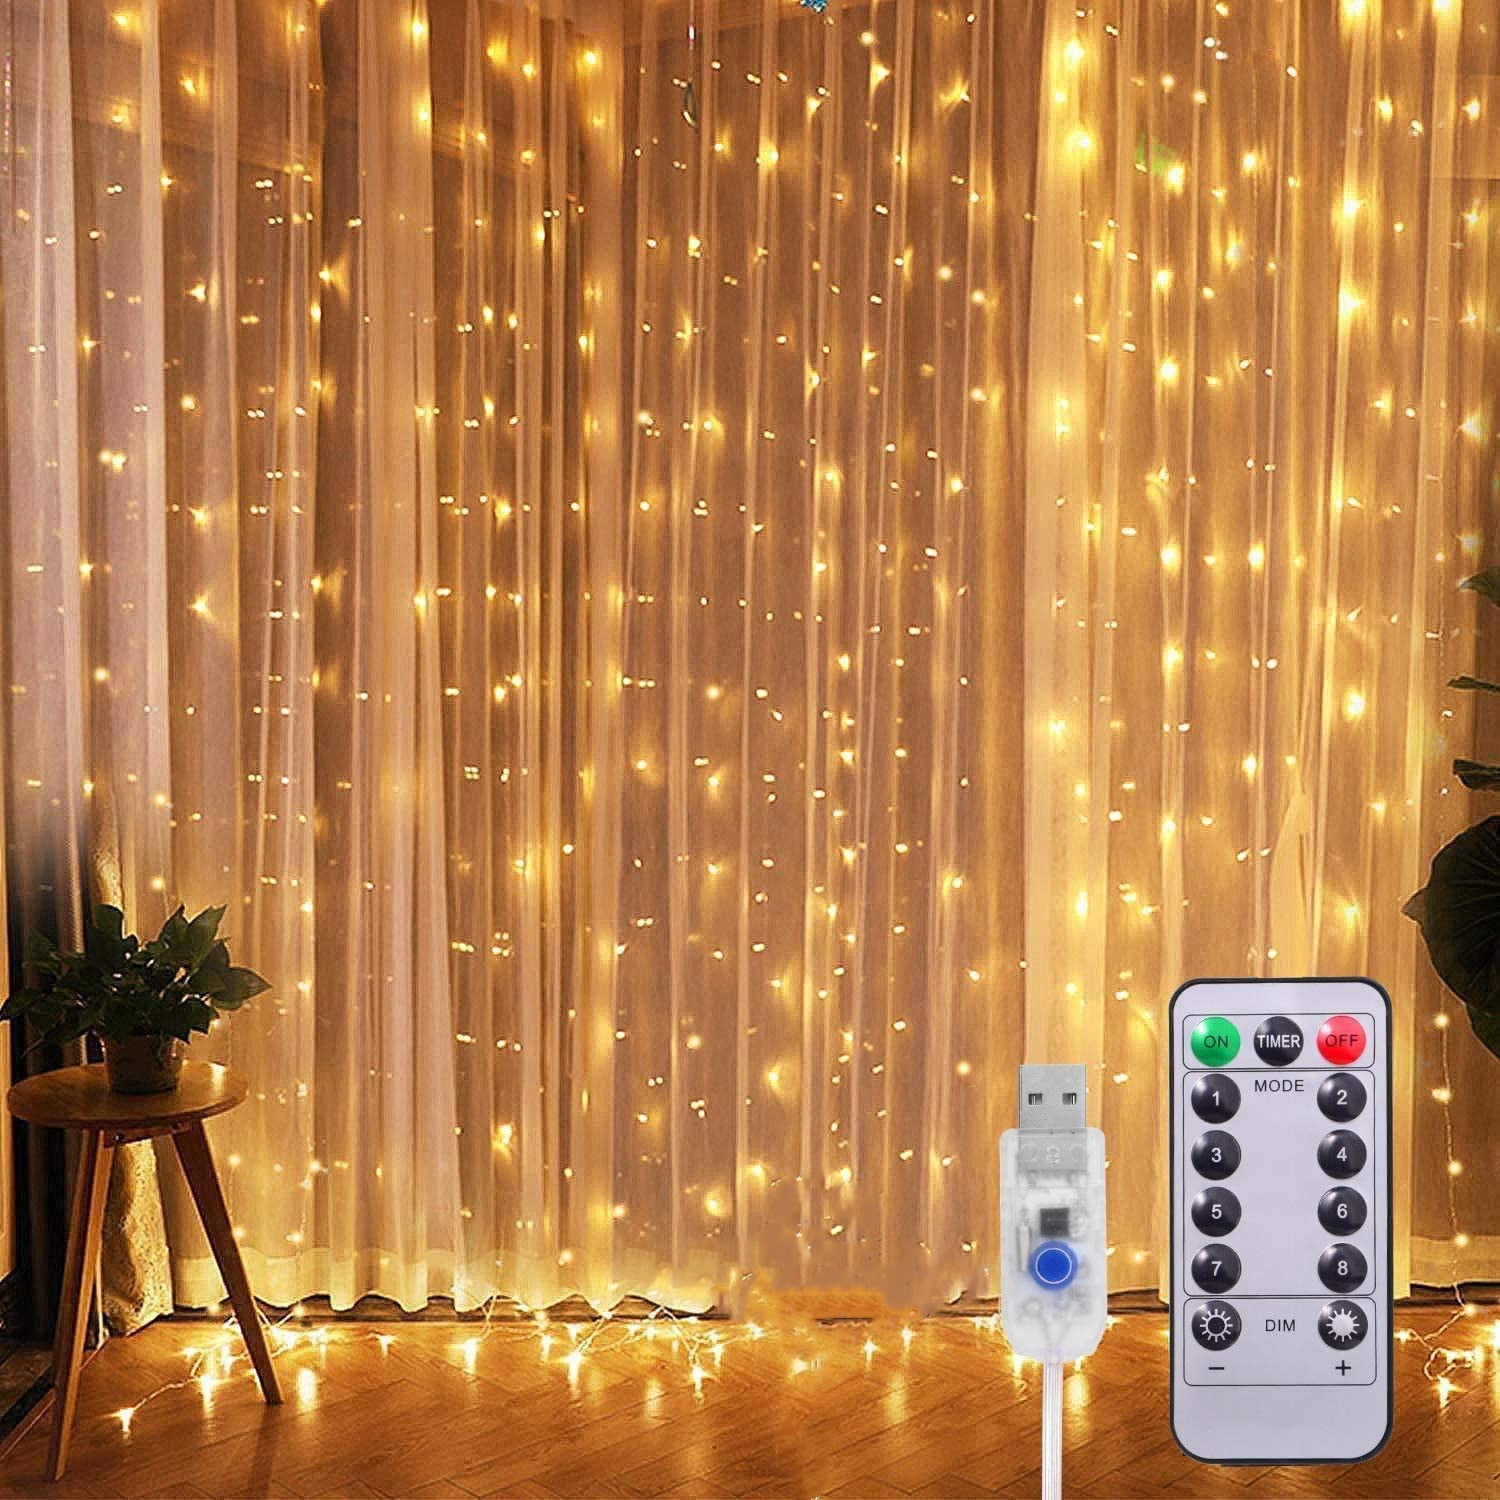 LED Curtain Lights Icicle Hanging Outdoor Wedding Christmas String Fairy Lights 